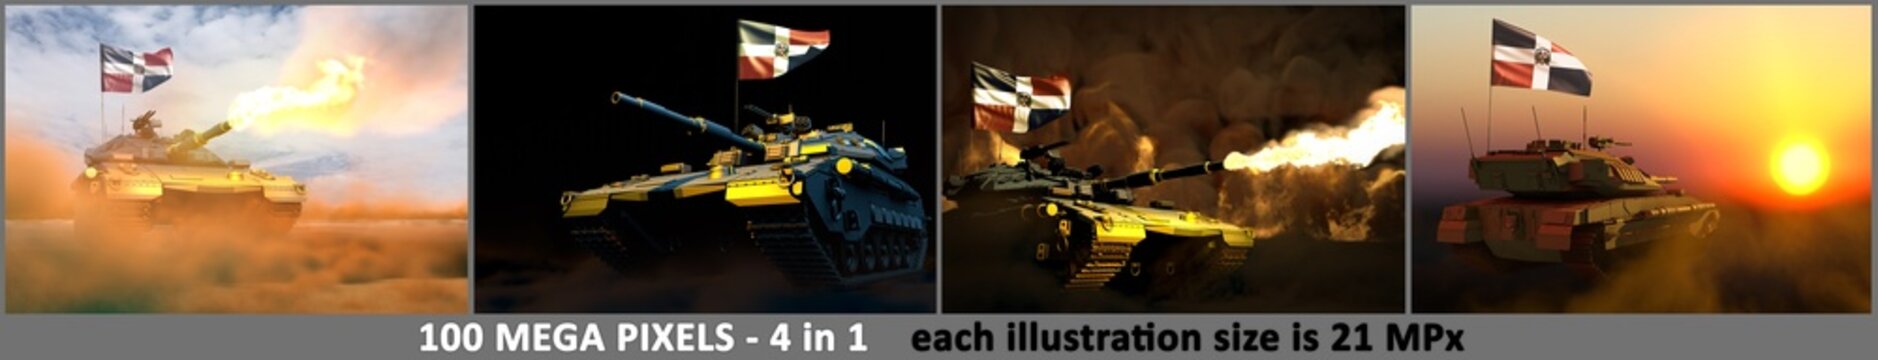 Dominican Republic army concept - 4 high resolution pictures of tank with not real design with Dominican Republic flag and free place for your text, military 3D Illustration